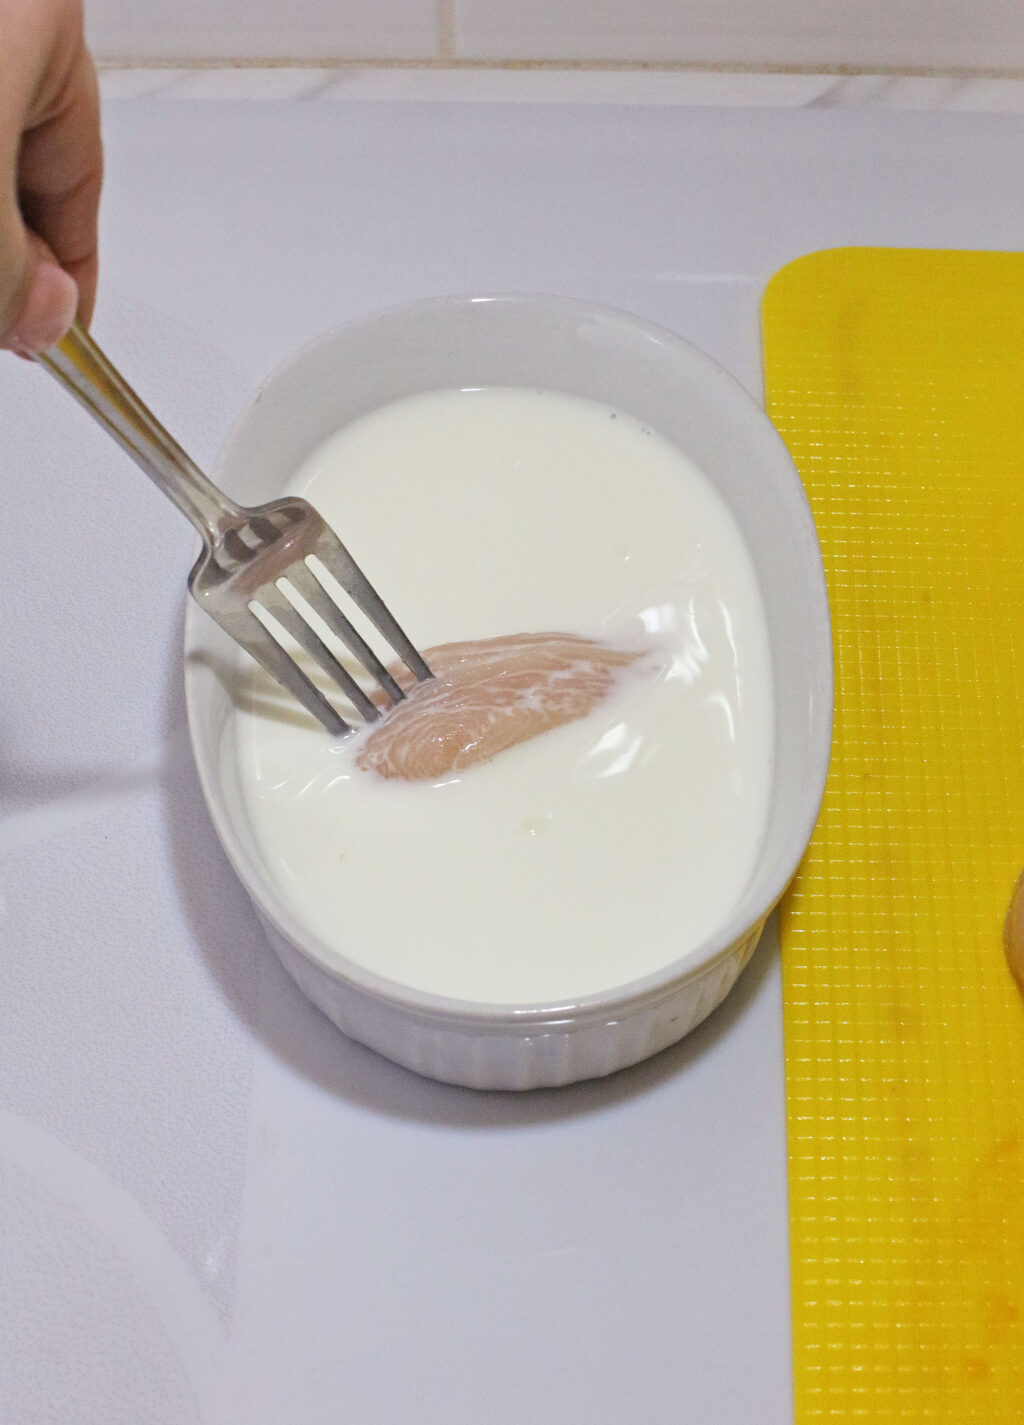 raw chicken nugget being dipped into milk